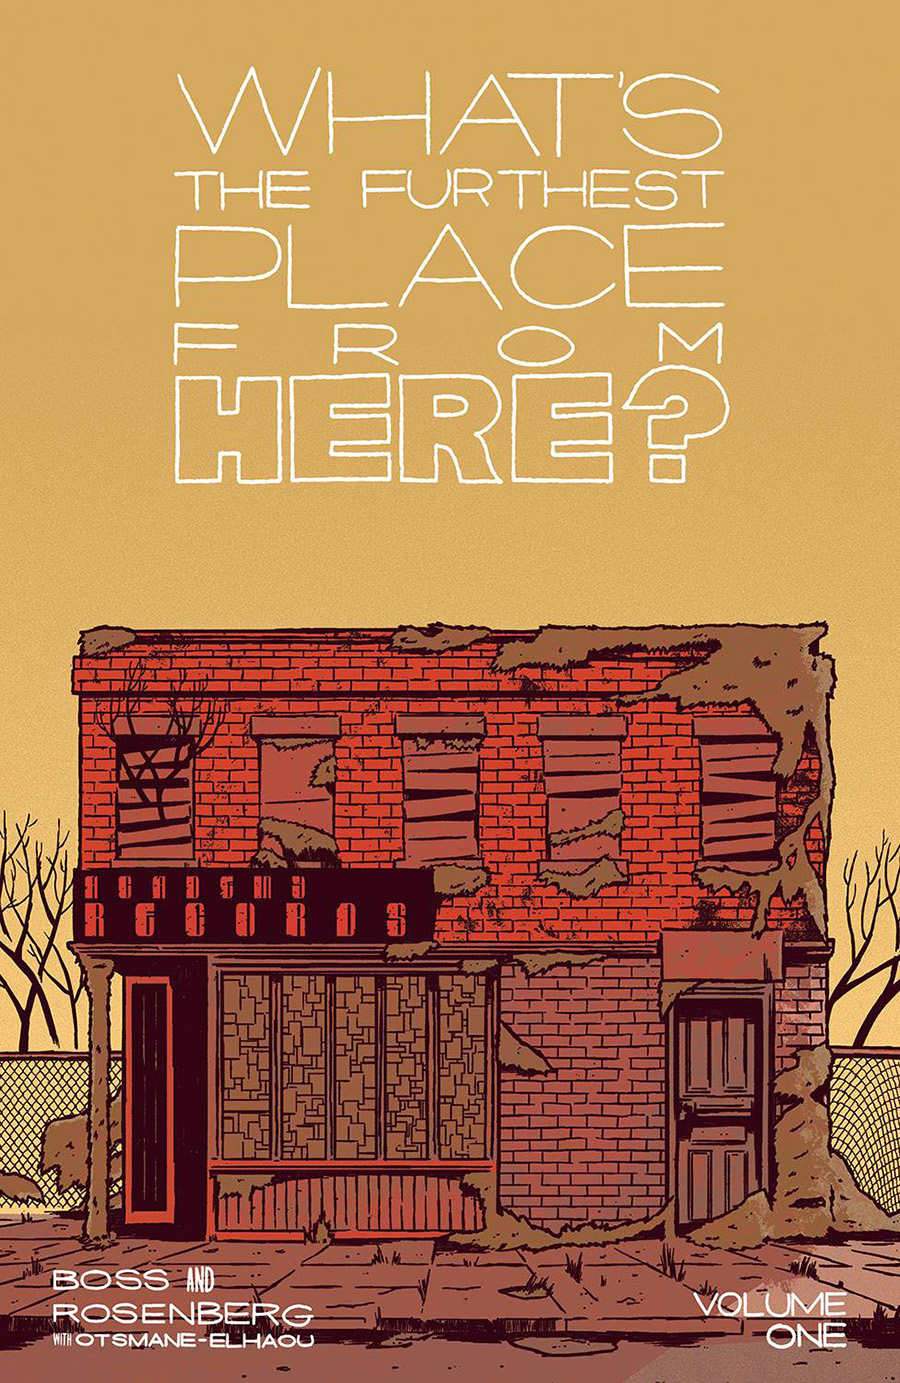 Whats The Furthest Place From Here Vol 1 TP